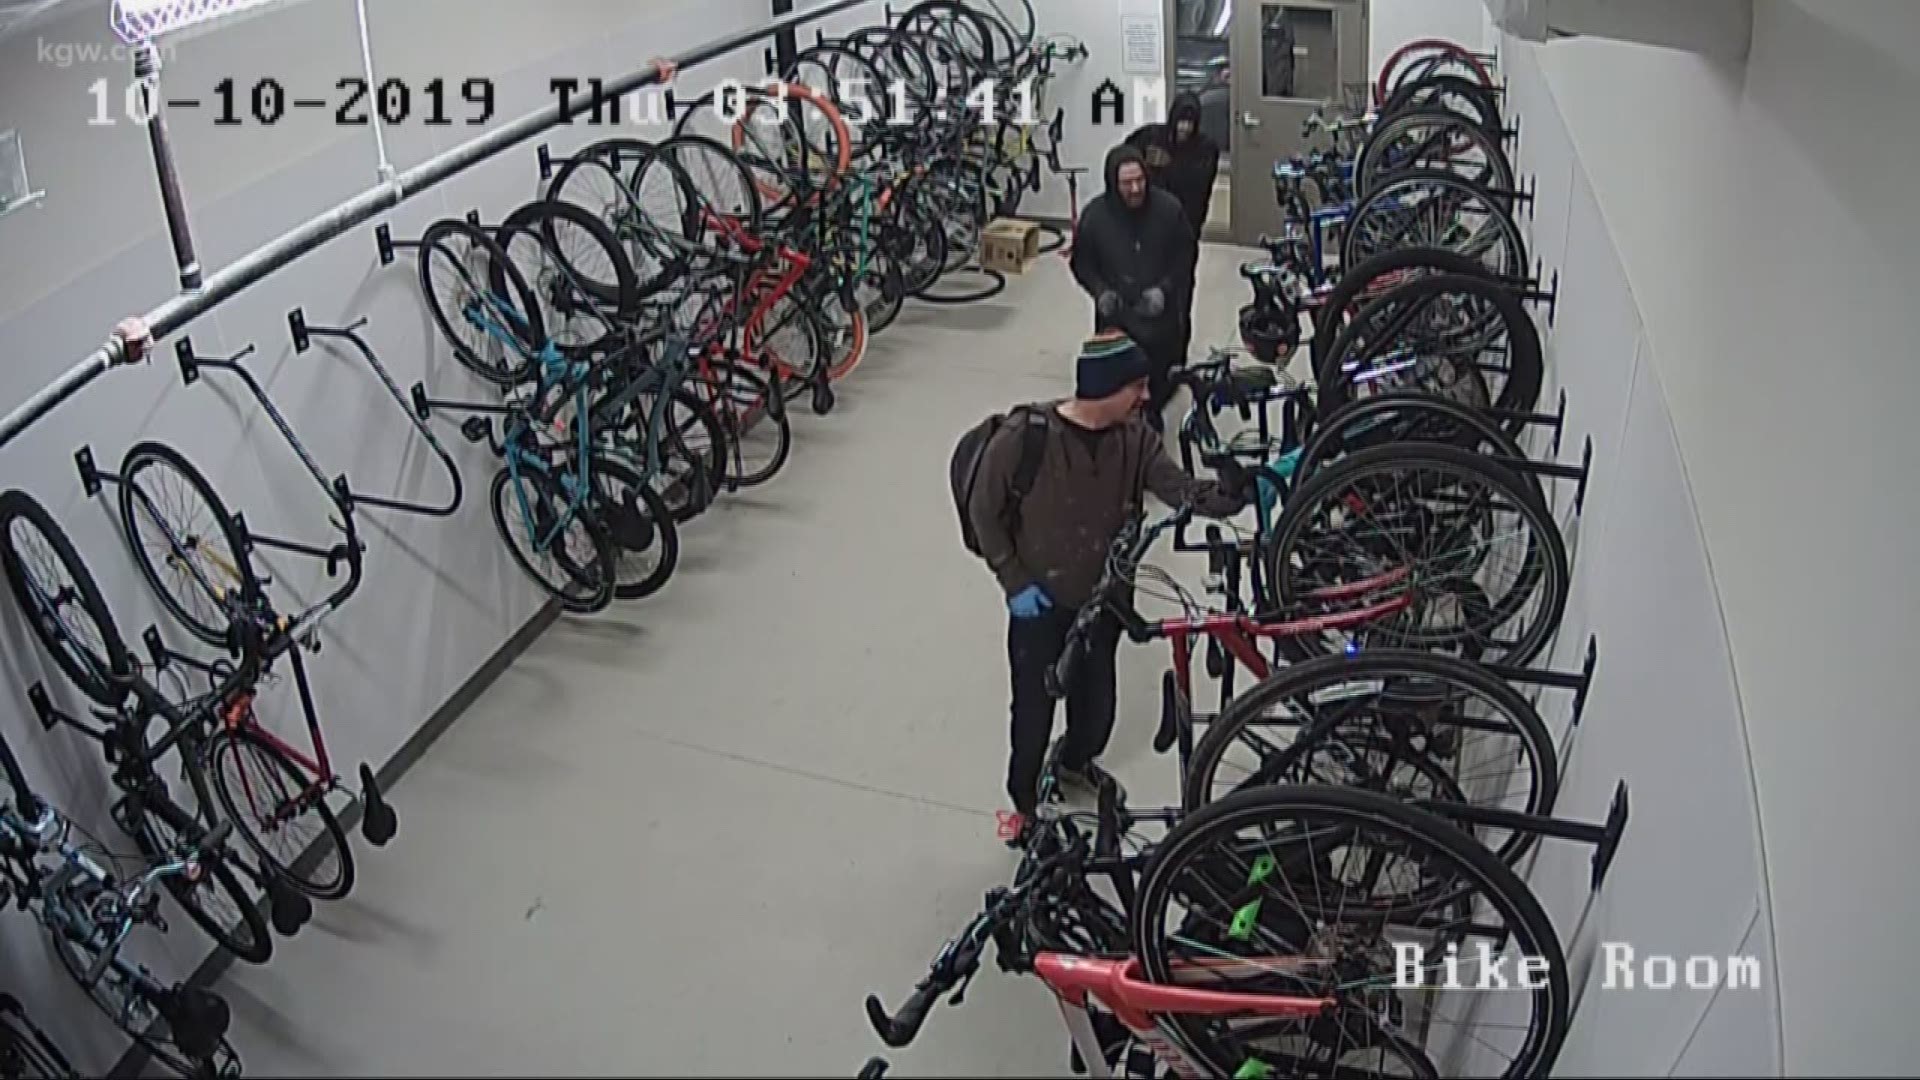 Video shows three  men scouting out the different bikes and then quickly getting to work. One of the men even uses a power screwdriver to take off a bike rack